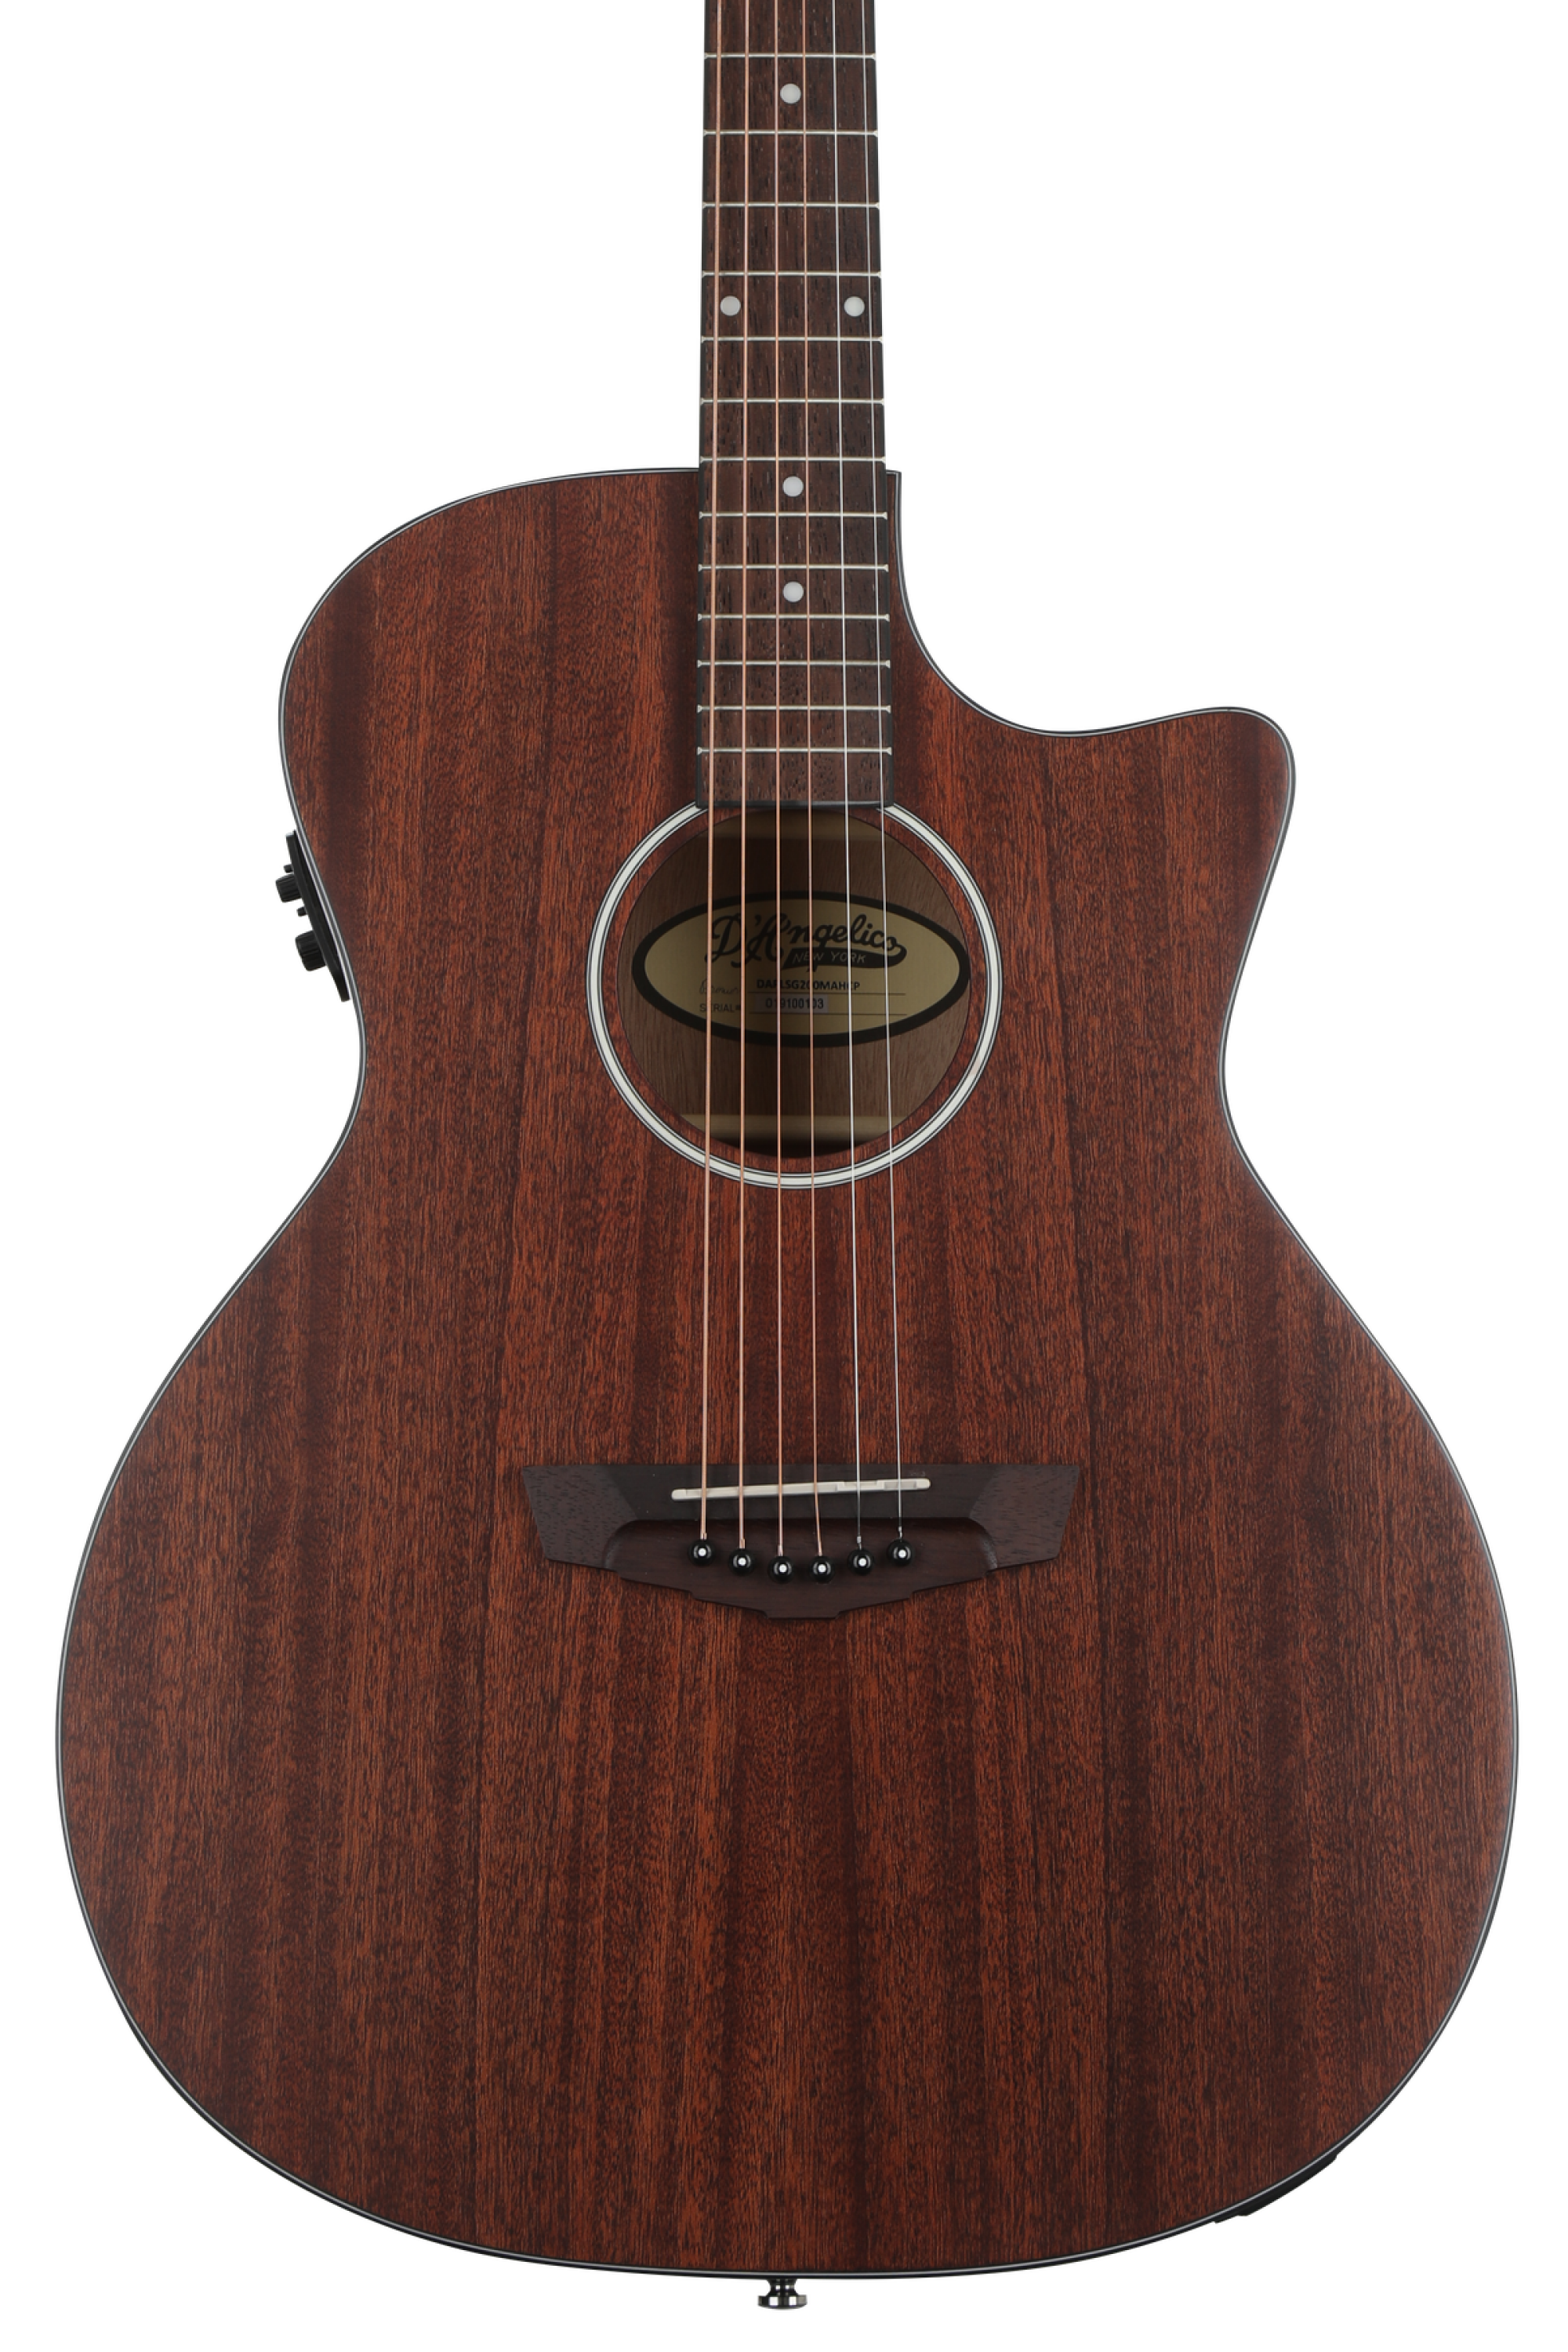 D'Angelico Premier Gramercy LS - Mahogany Satin | Sweetwater